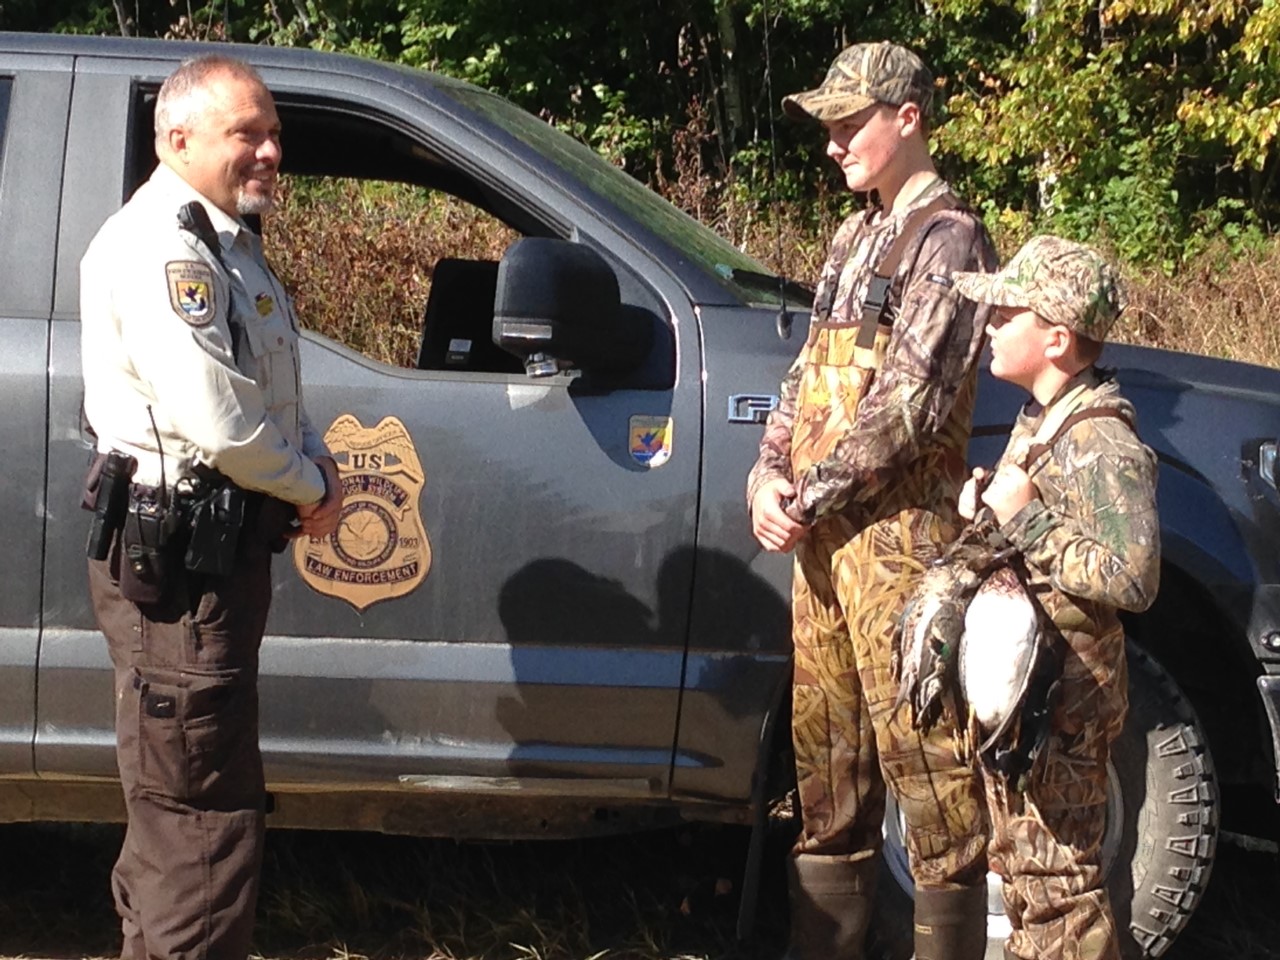 One officer and two youth hunters with their ducks stand near a truck